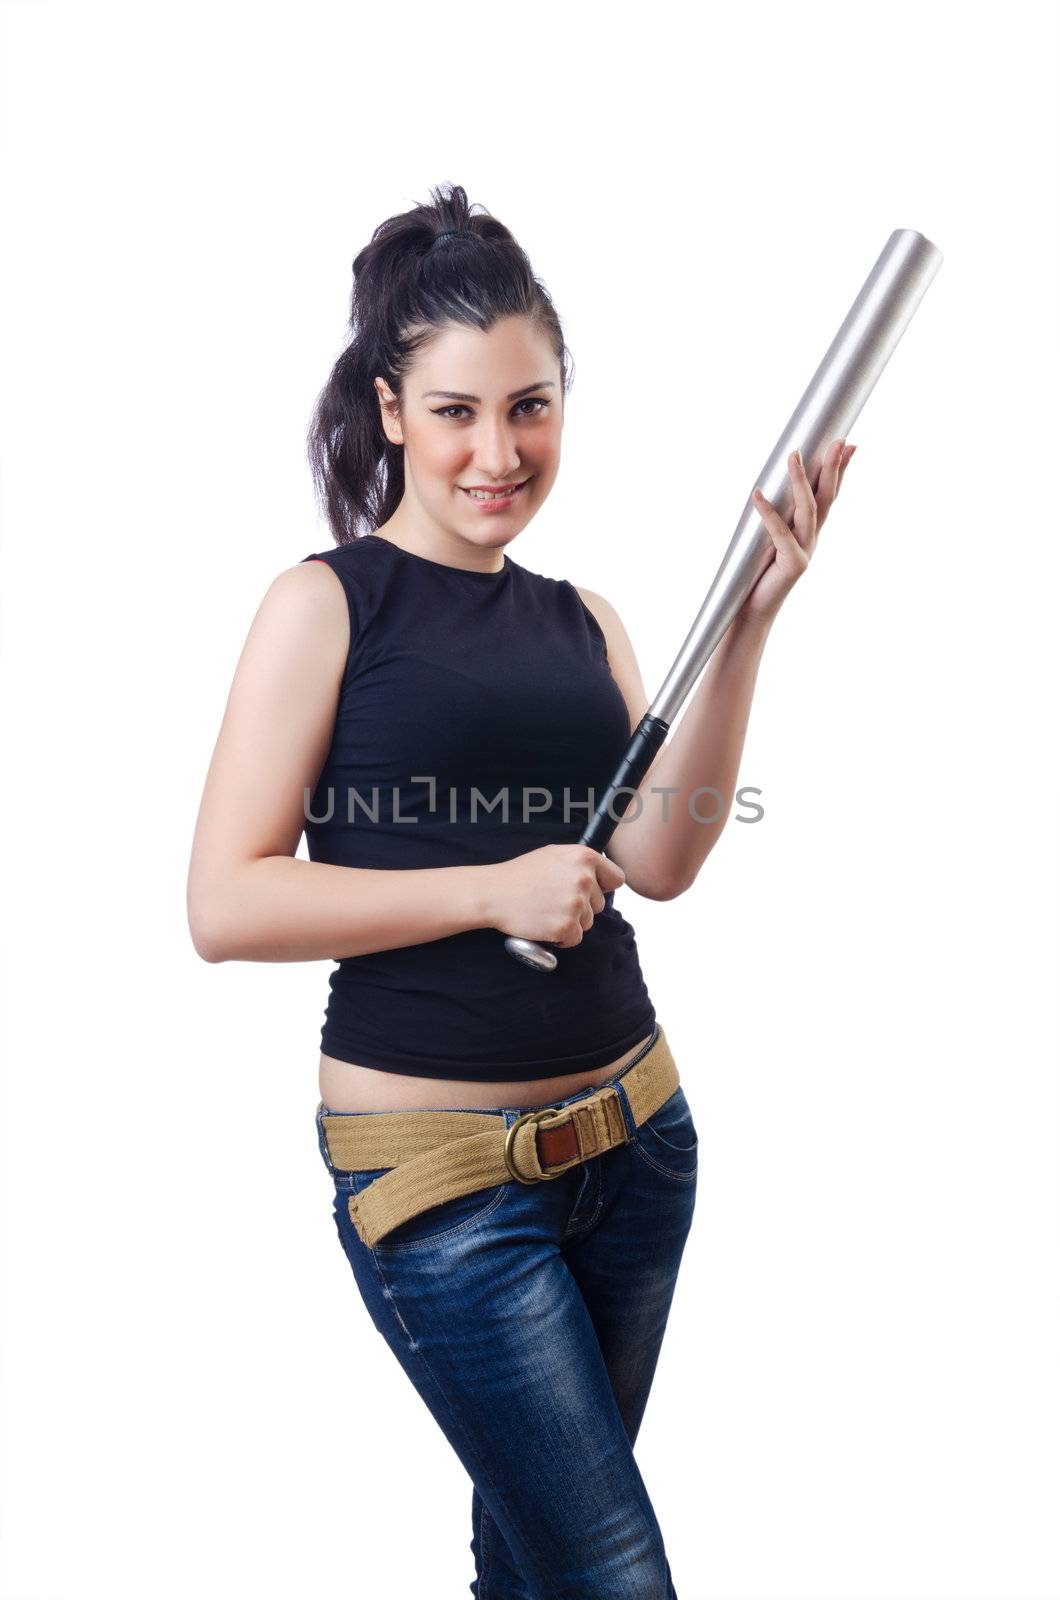 Woman criminal with bat on white